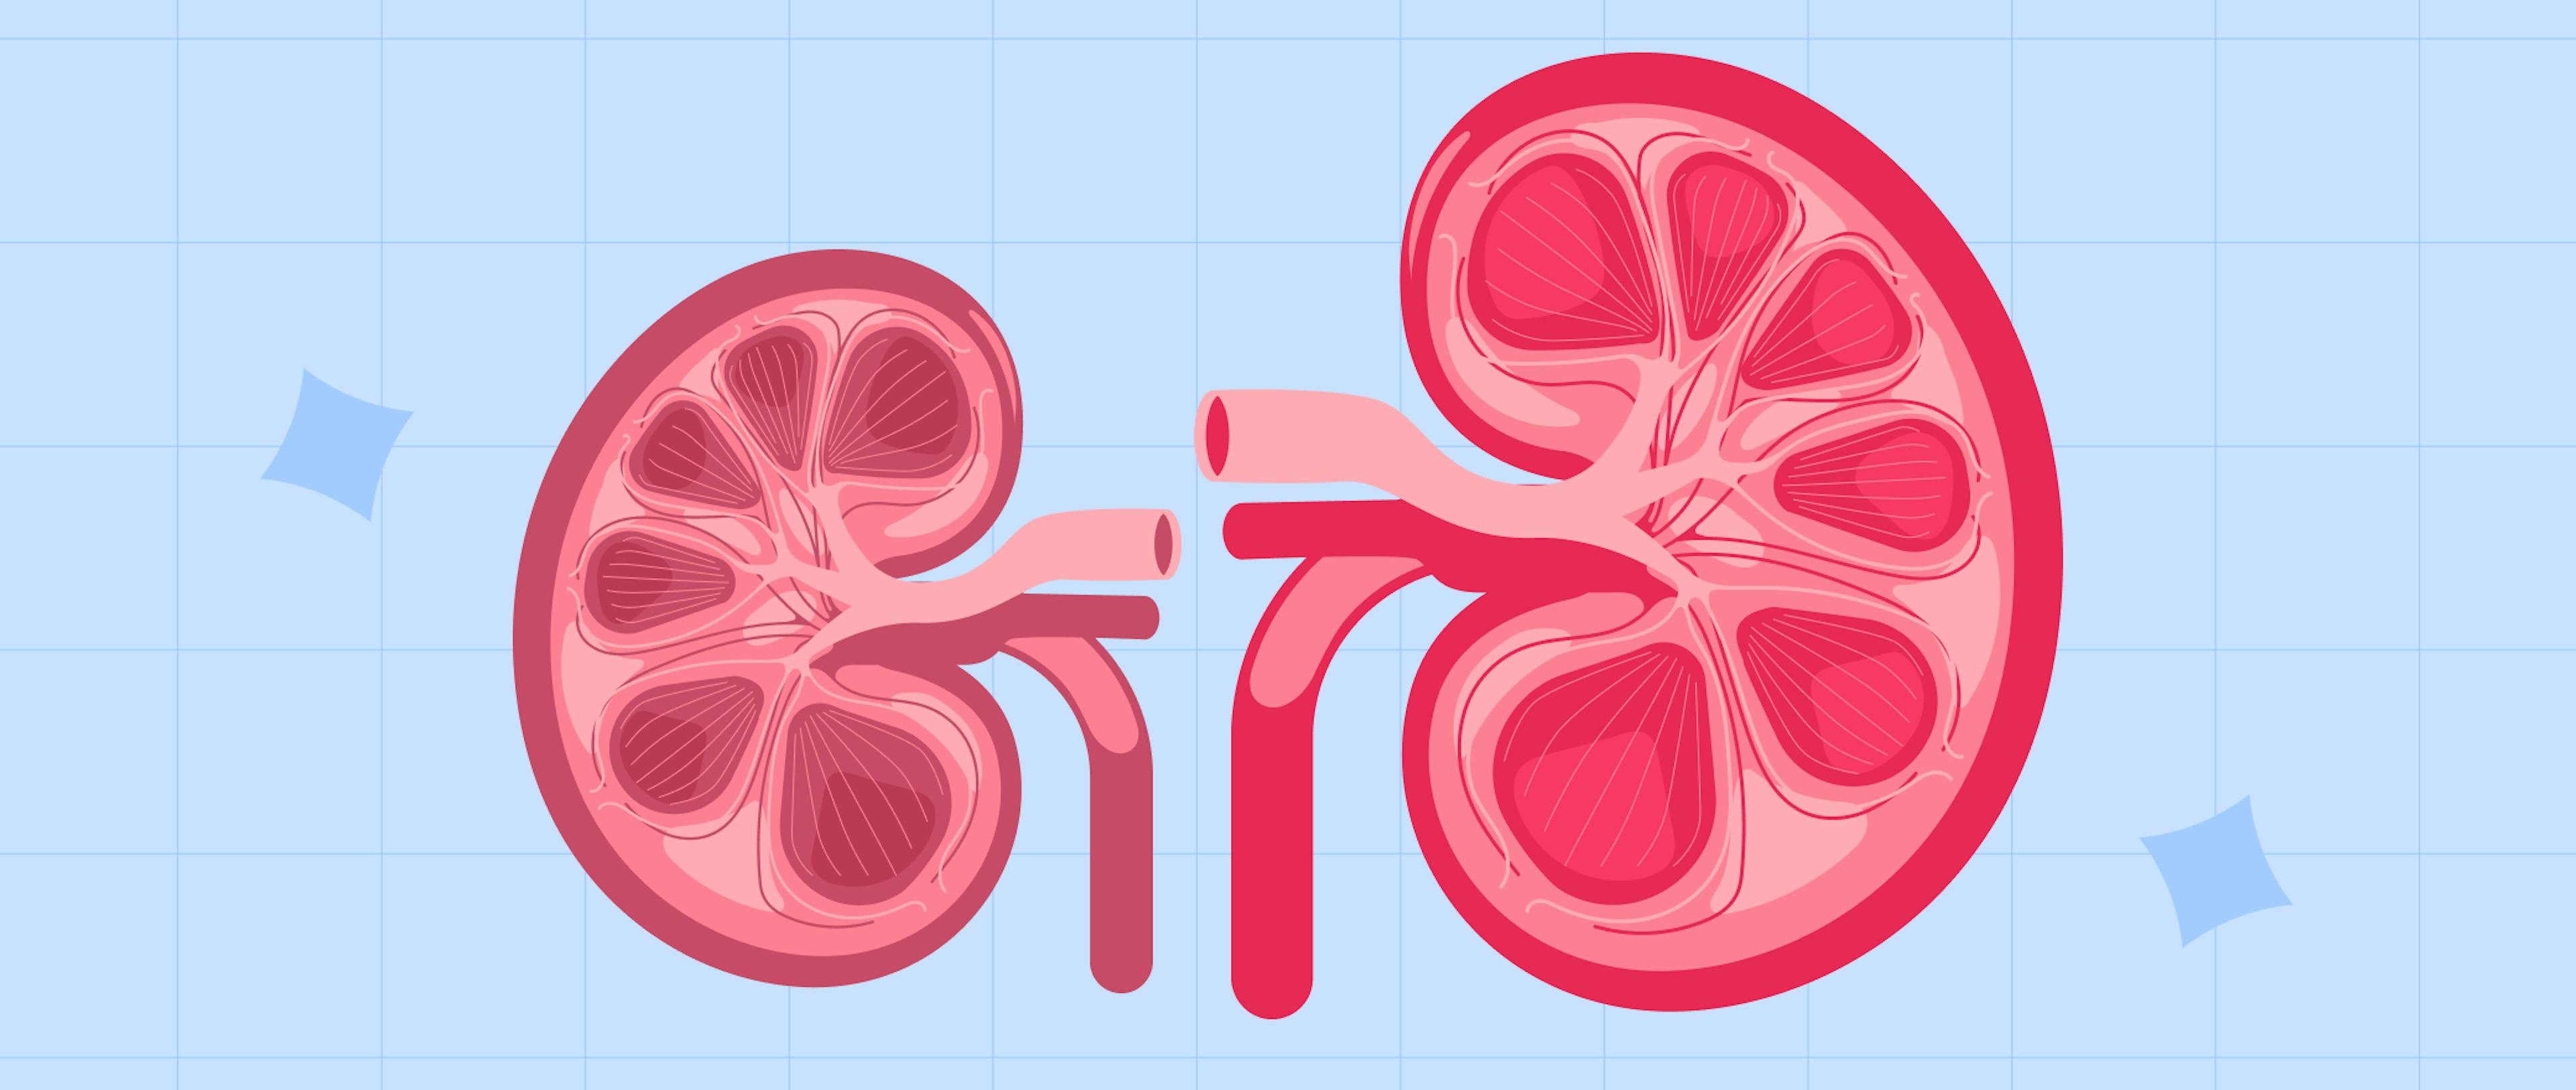 A graphic representation of a swollen kidney against a normal one